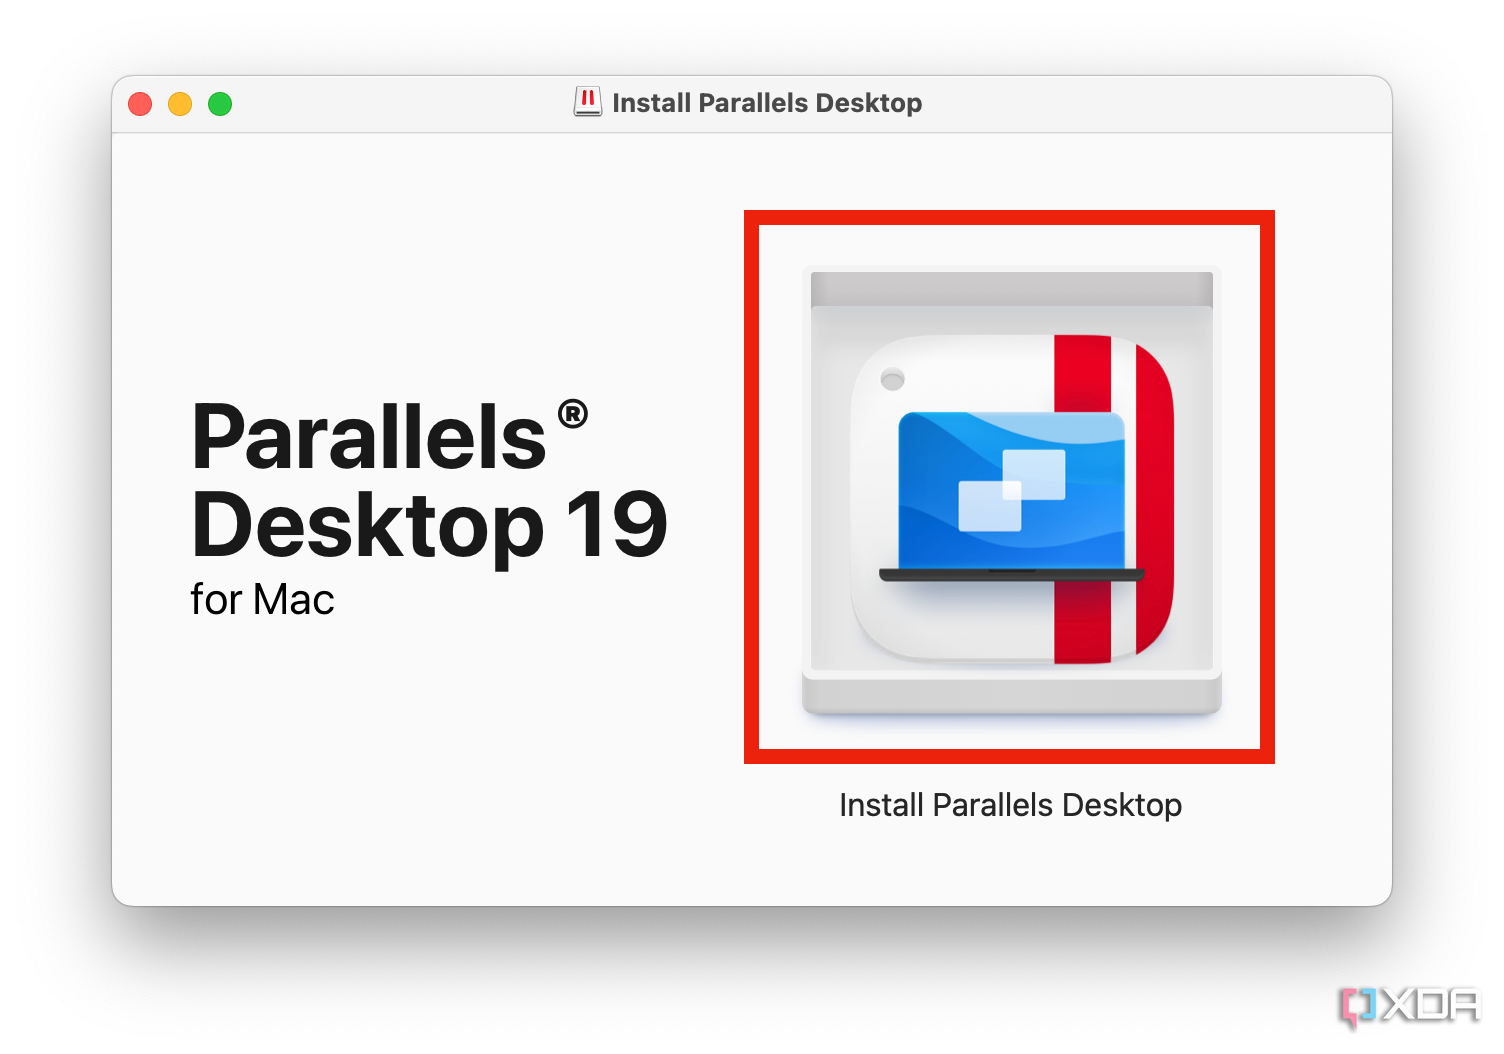 The Parallels 19 app logo in the installer in macOS.